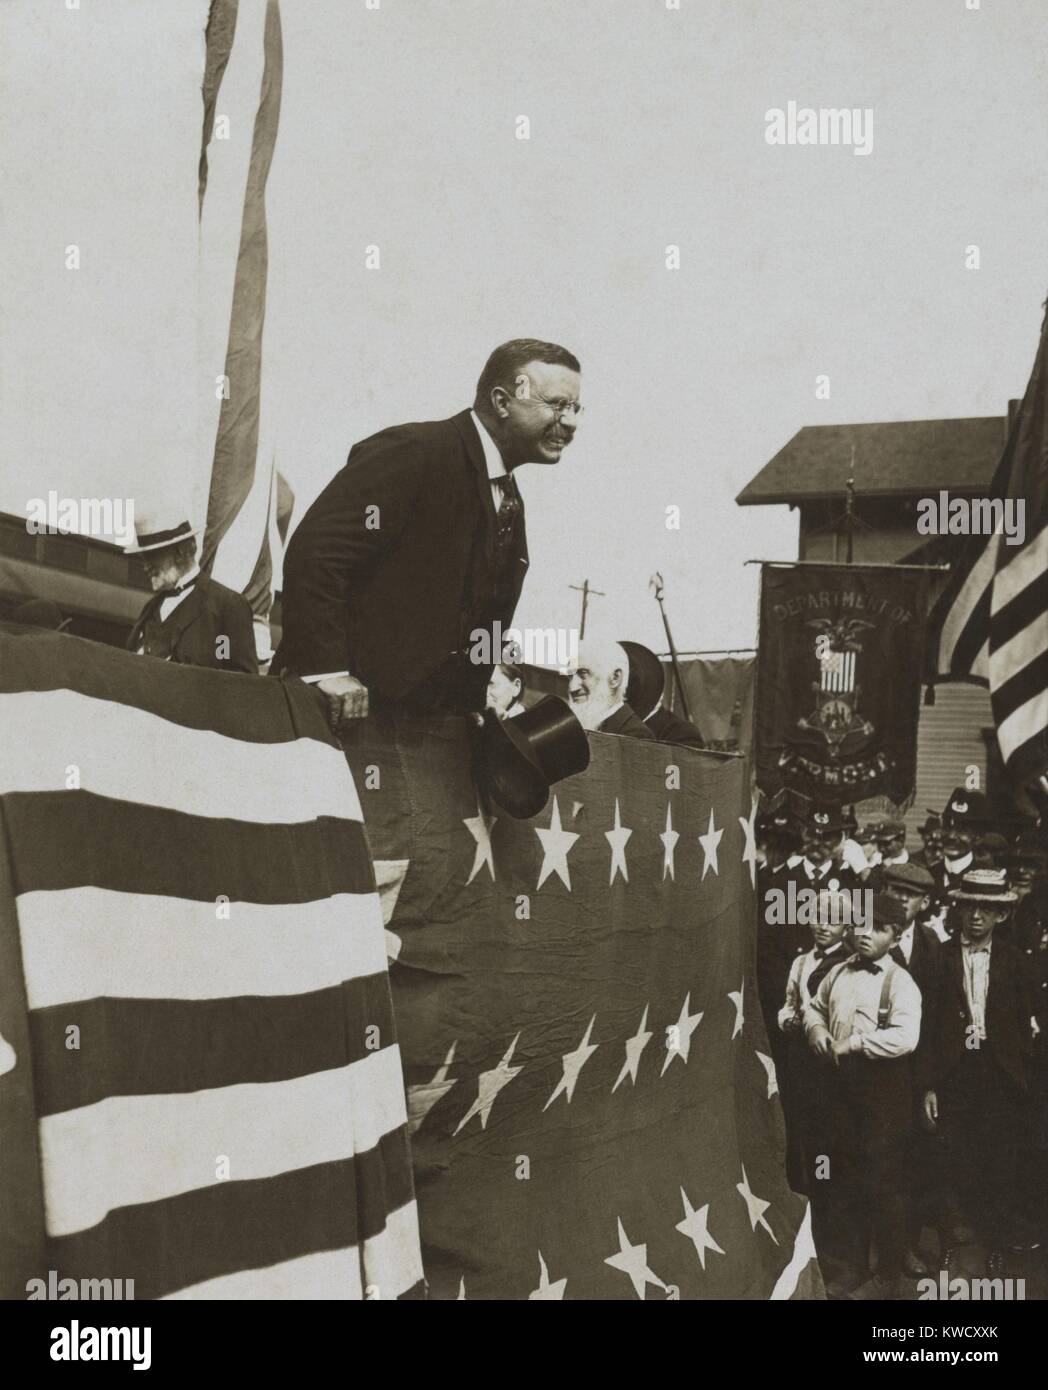 Theodore Roosevelt delivering a speech, Brattleboro, Vermont, Sept. 1902. From Aug. 22 through Sept. 3, TR made a 600 mile circuit of New England making major policy speeches to large crowds (BSLOC 2017 4 50) Stock Photo